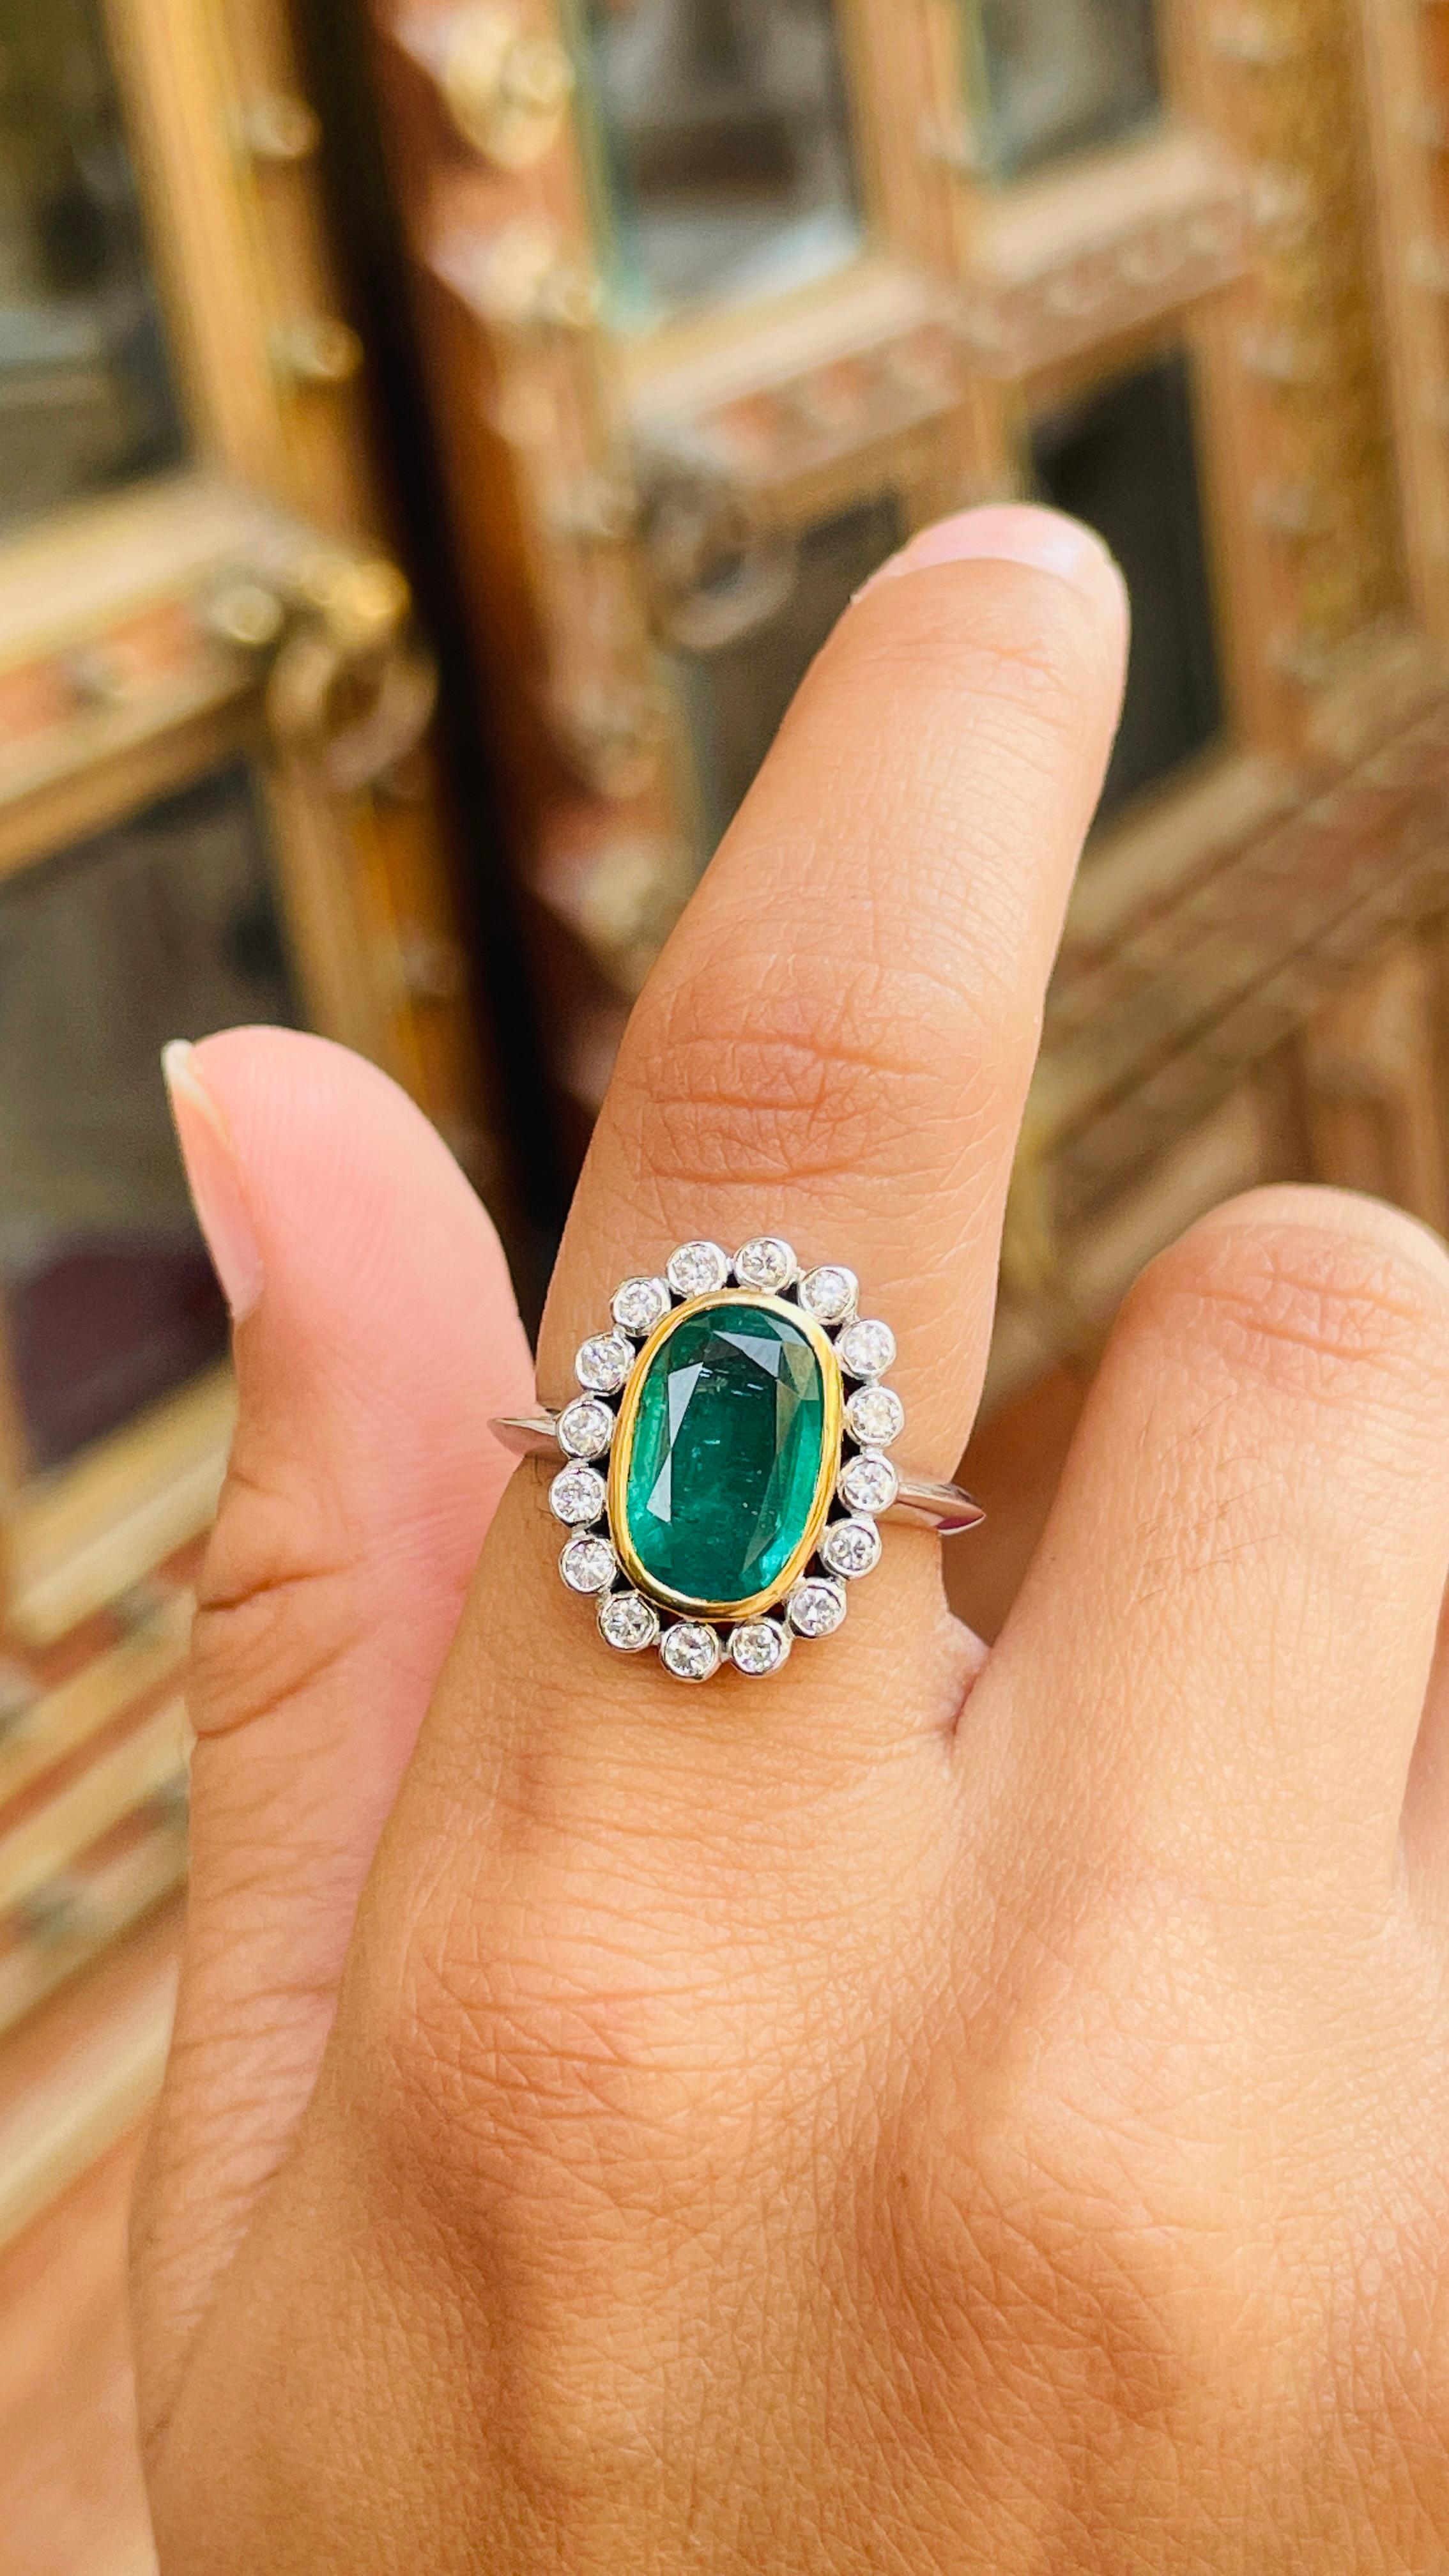 For Sale:  18K White Gold Emerald and Diamond Cocktail Ring  2